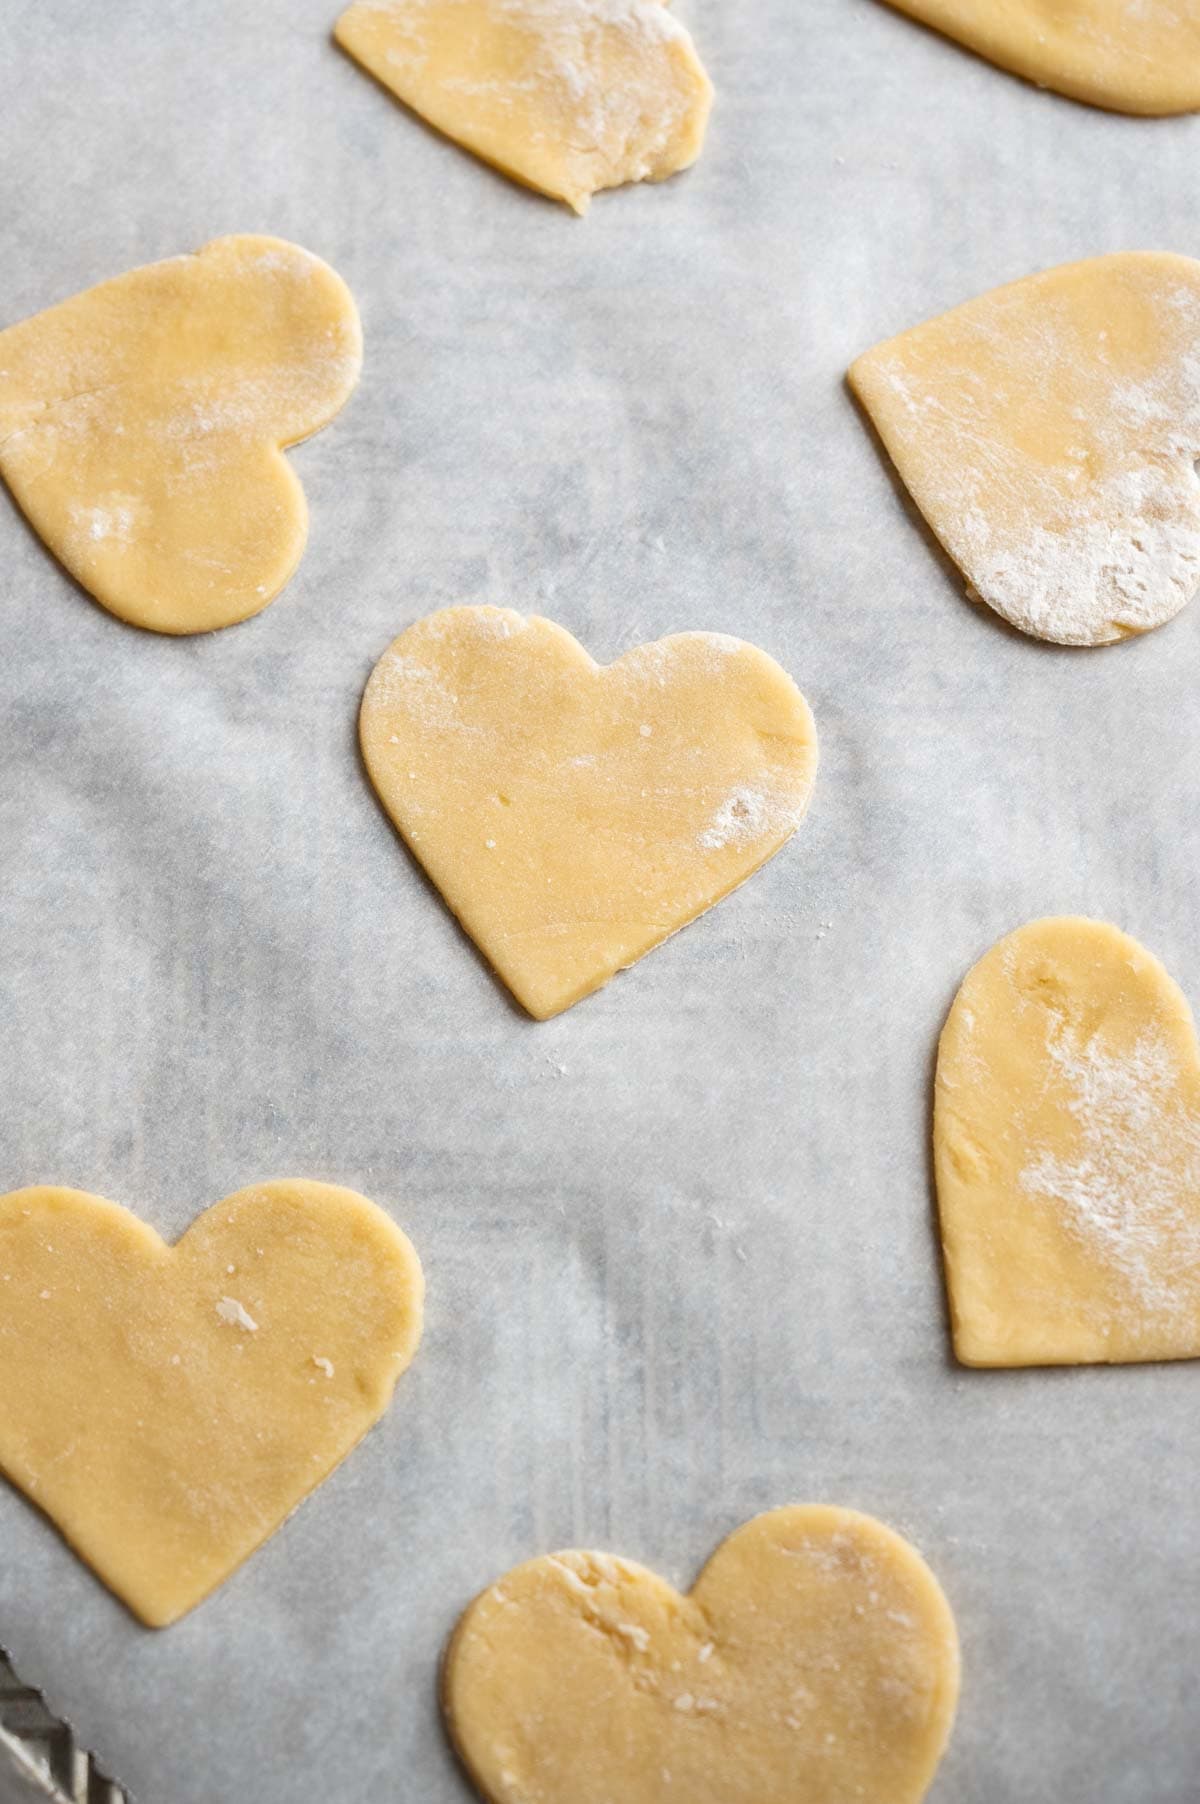 The cut out hearts sitting on a lined baking sheet.